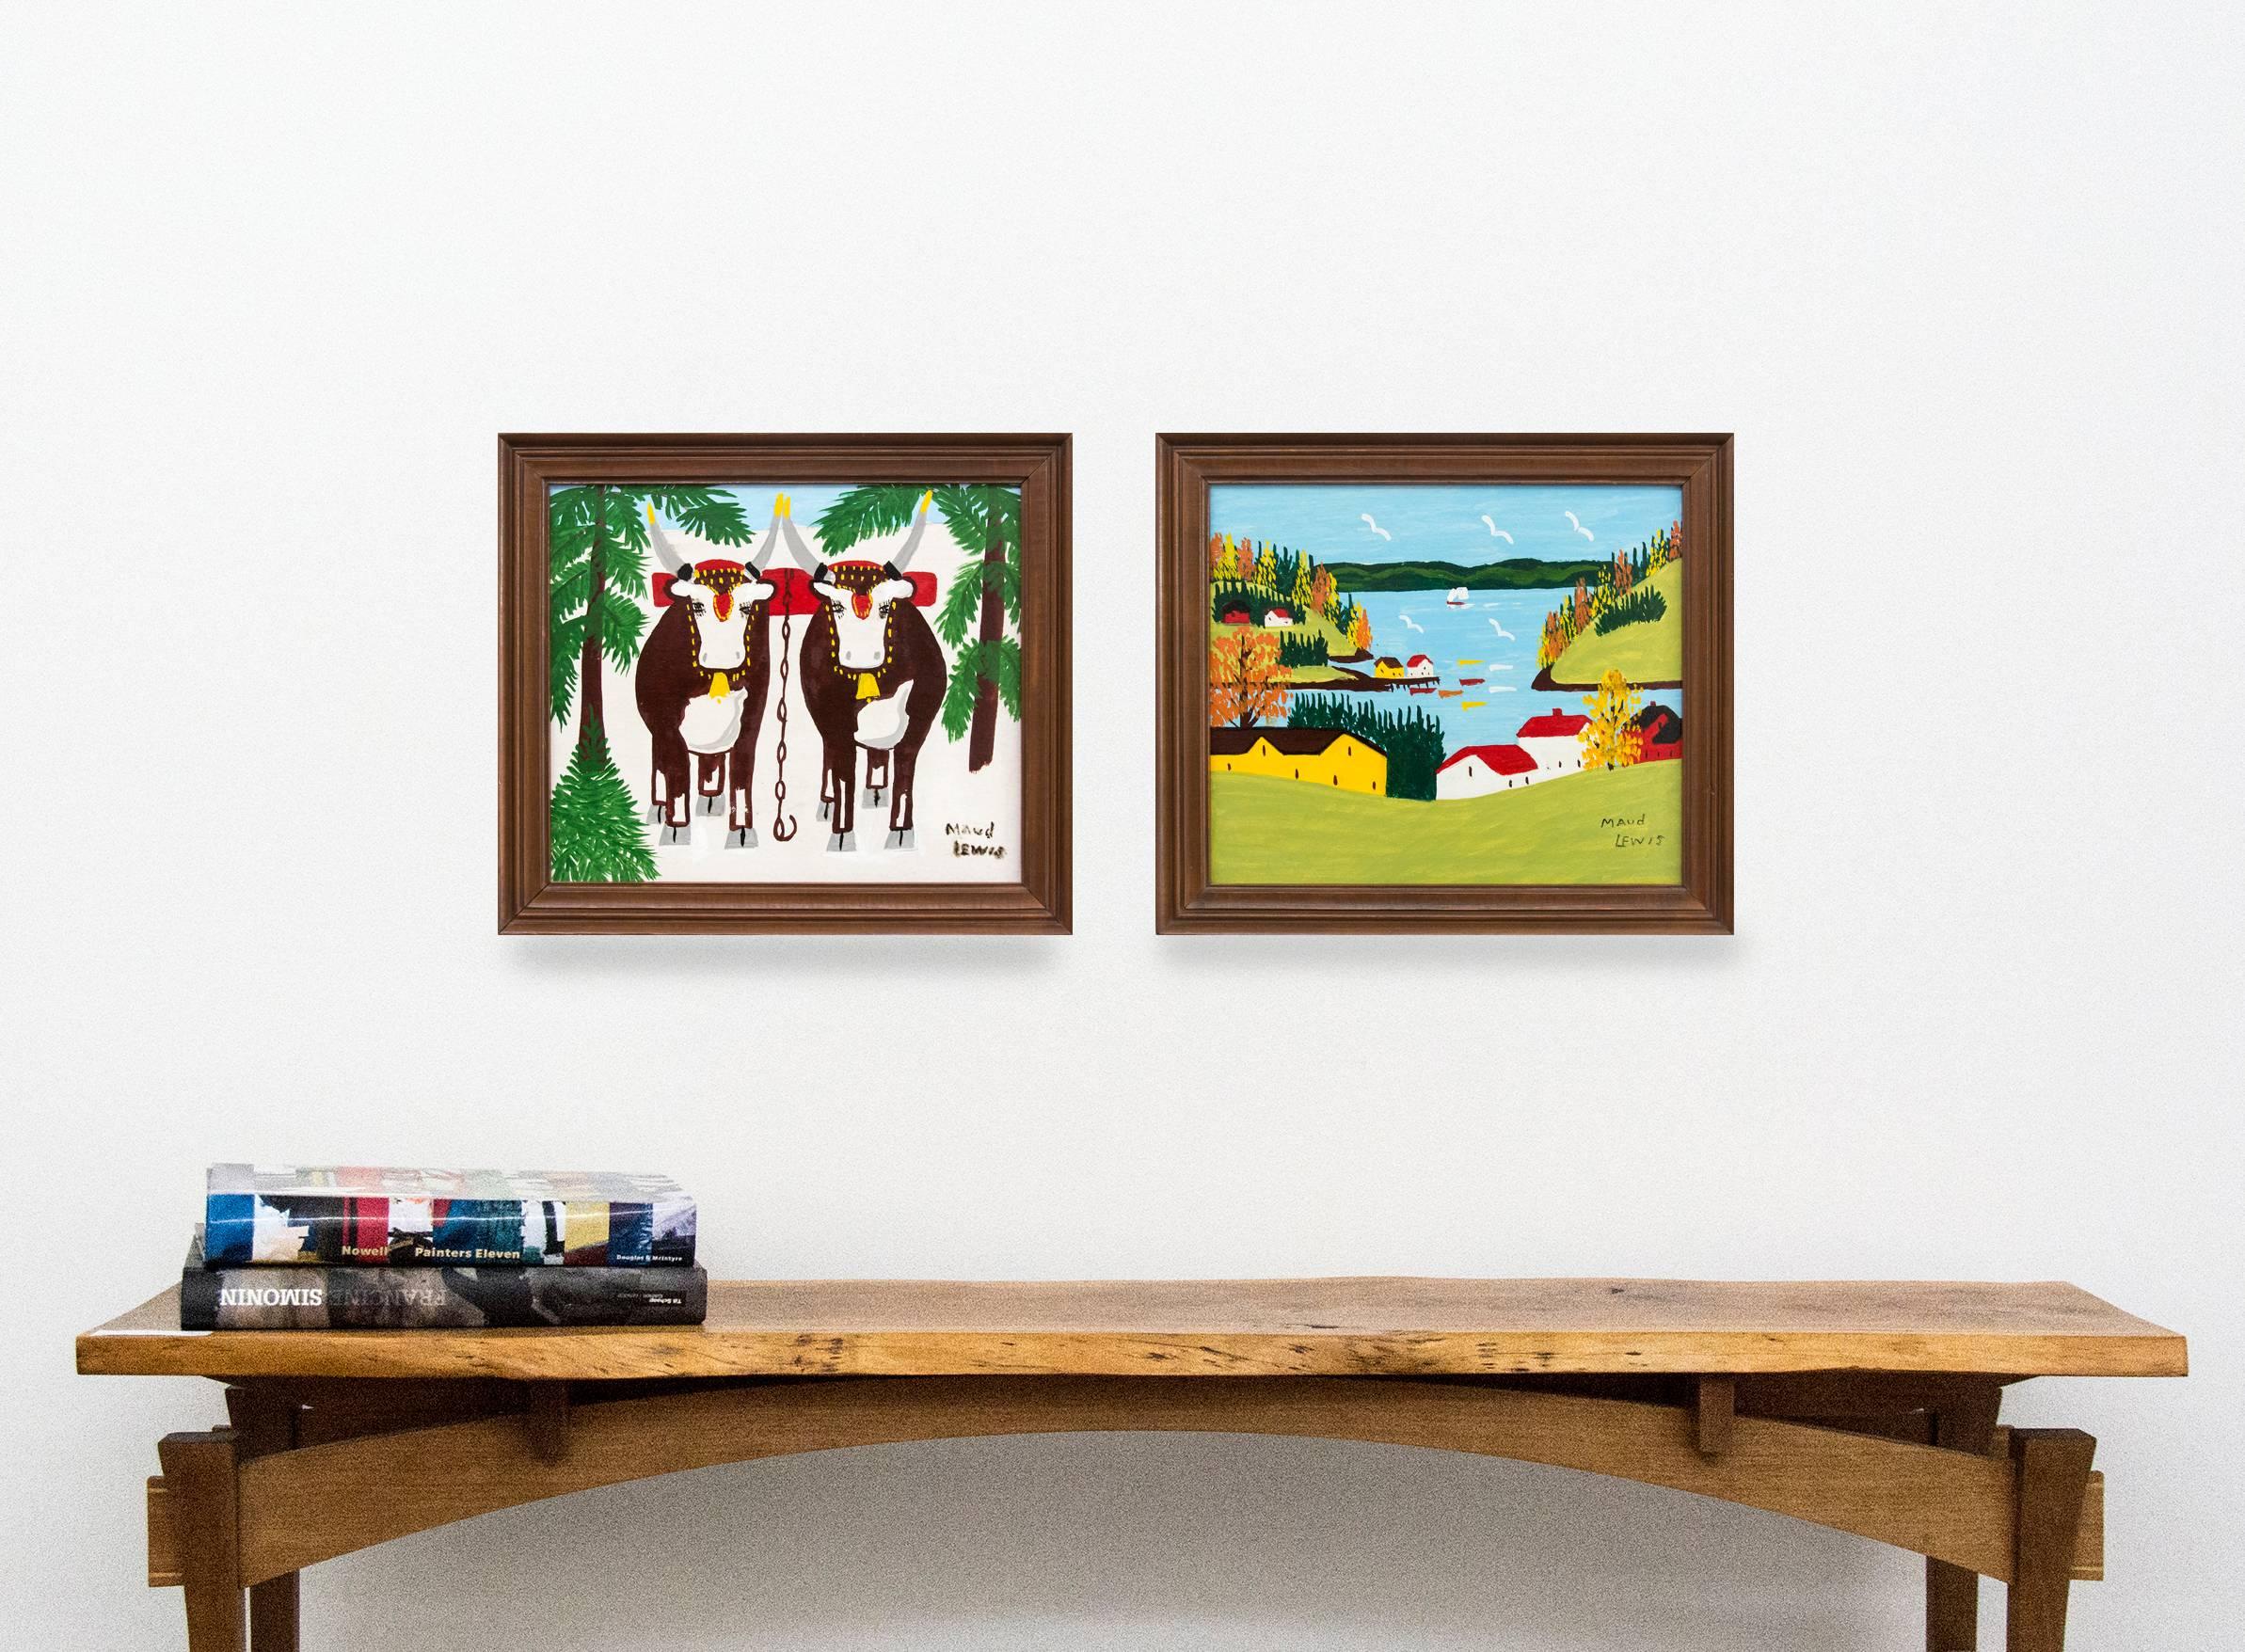 A pair of oxen festooned with bells and chains are yoked together in this charming oil on board by renowned folk artist Maud Lewis. Framed by a snowy ground and bright green pines, the oxen each have four hooves visible. This painting is signed,